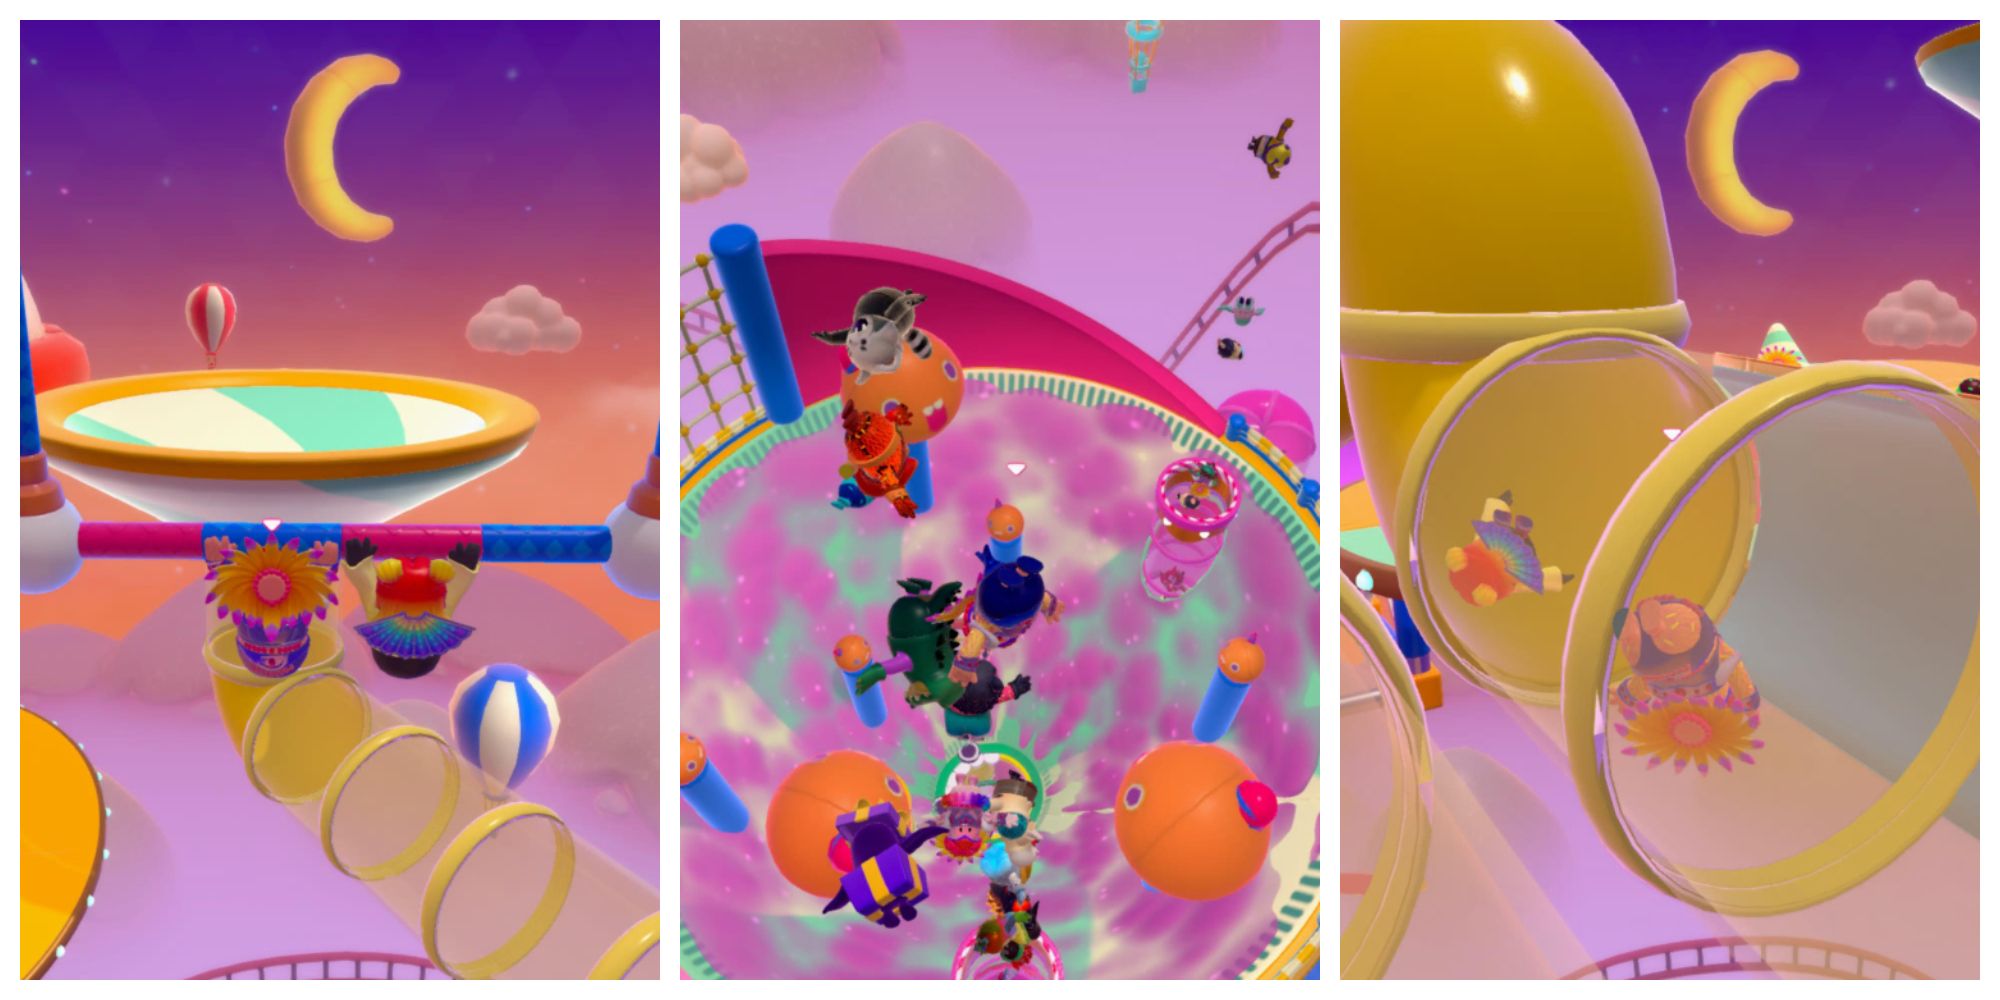 two fall guys on a trapeze swing; fall guys falling toward a large, purple and green funnel; two fall guys moving through a yellow, transparent pipe